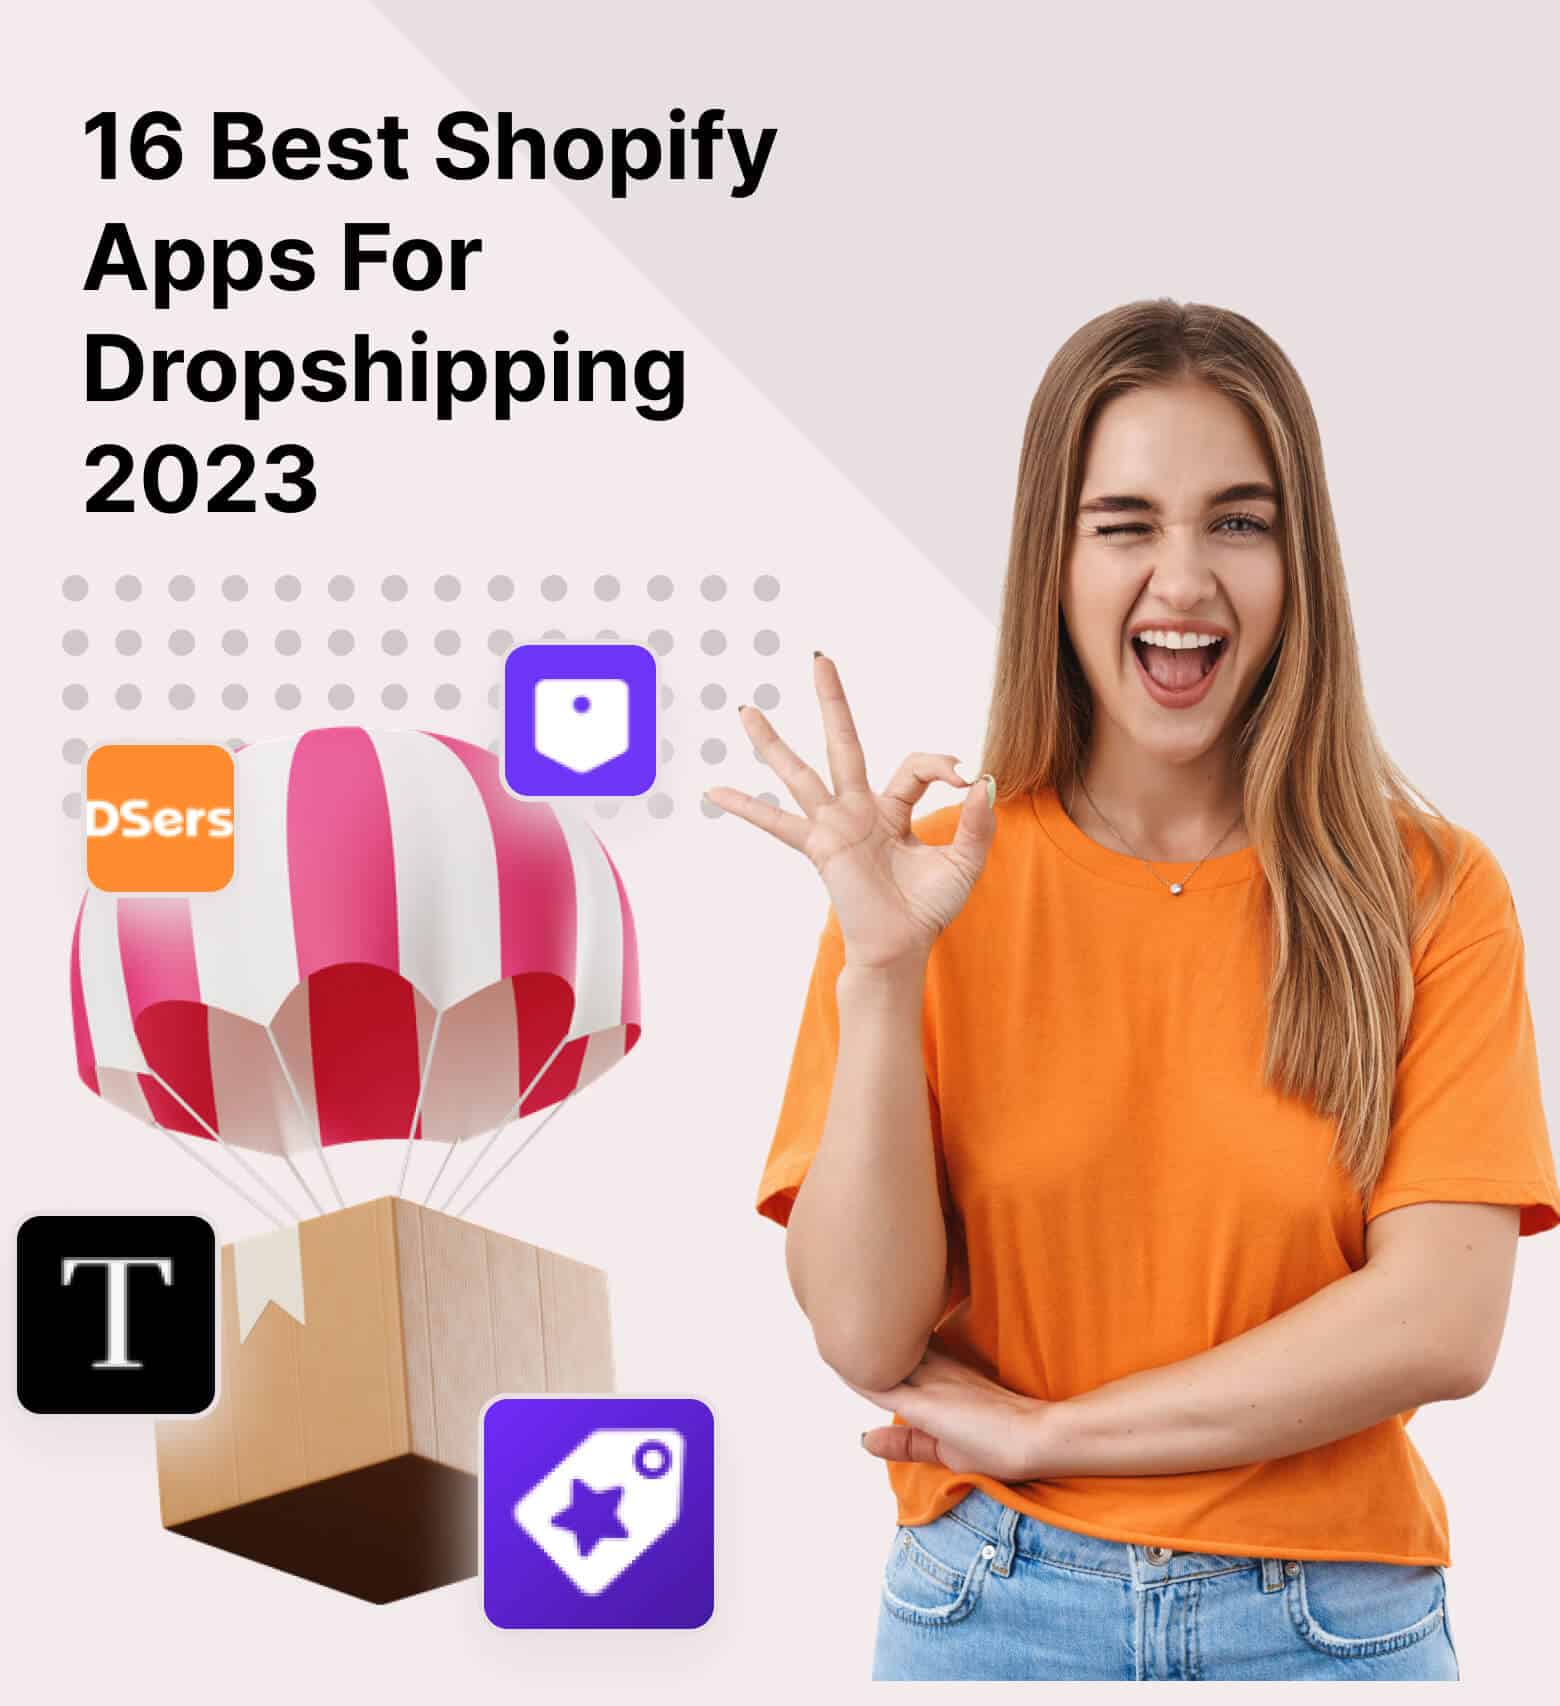 Best Shopify Apps For Dropshipping